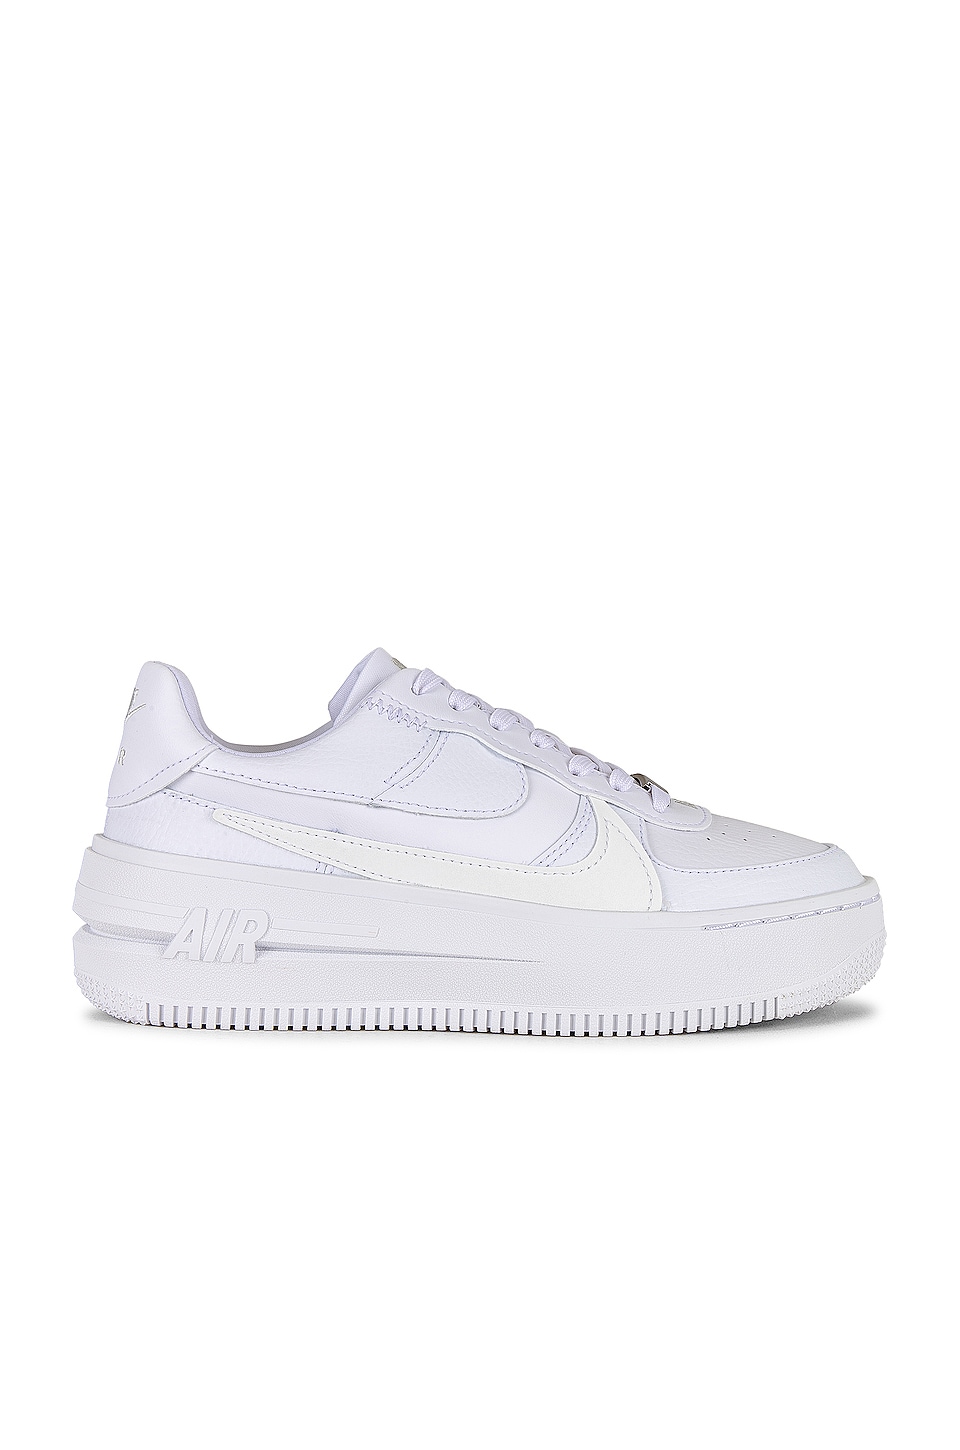 Nike Air Force 1 Plt.af.orm Sneaker in White & White | REVOLVE